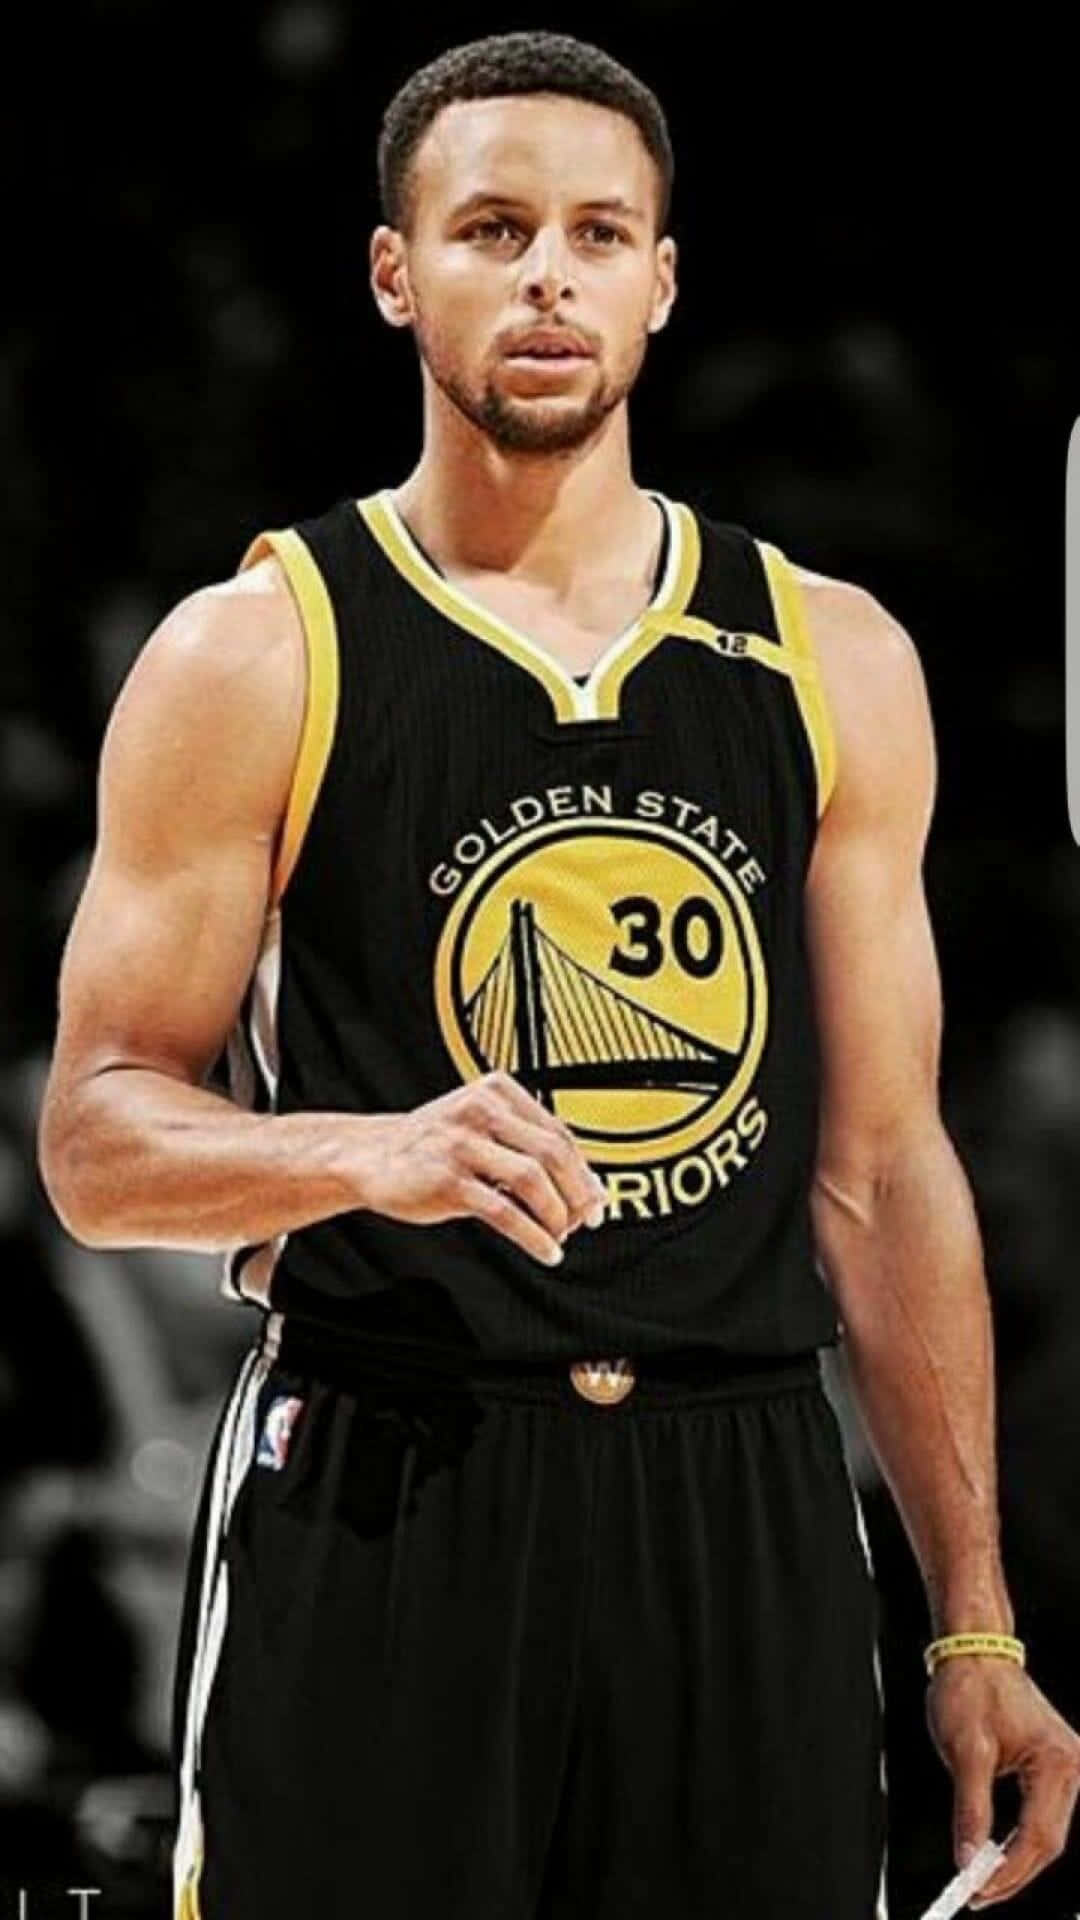 Golden State Warriors All-star Stephen Curry